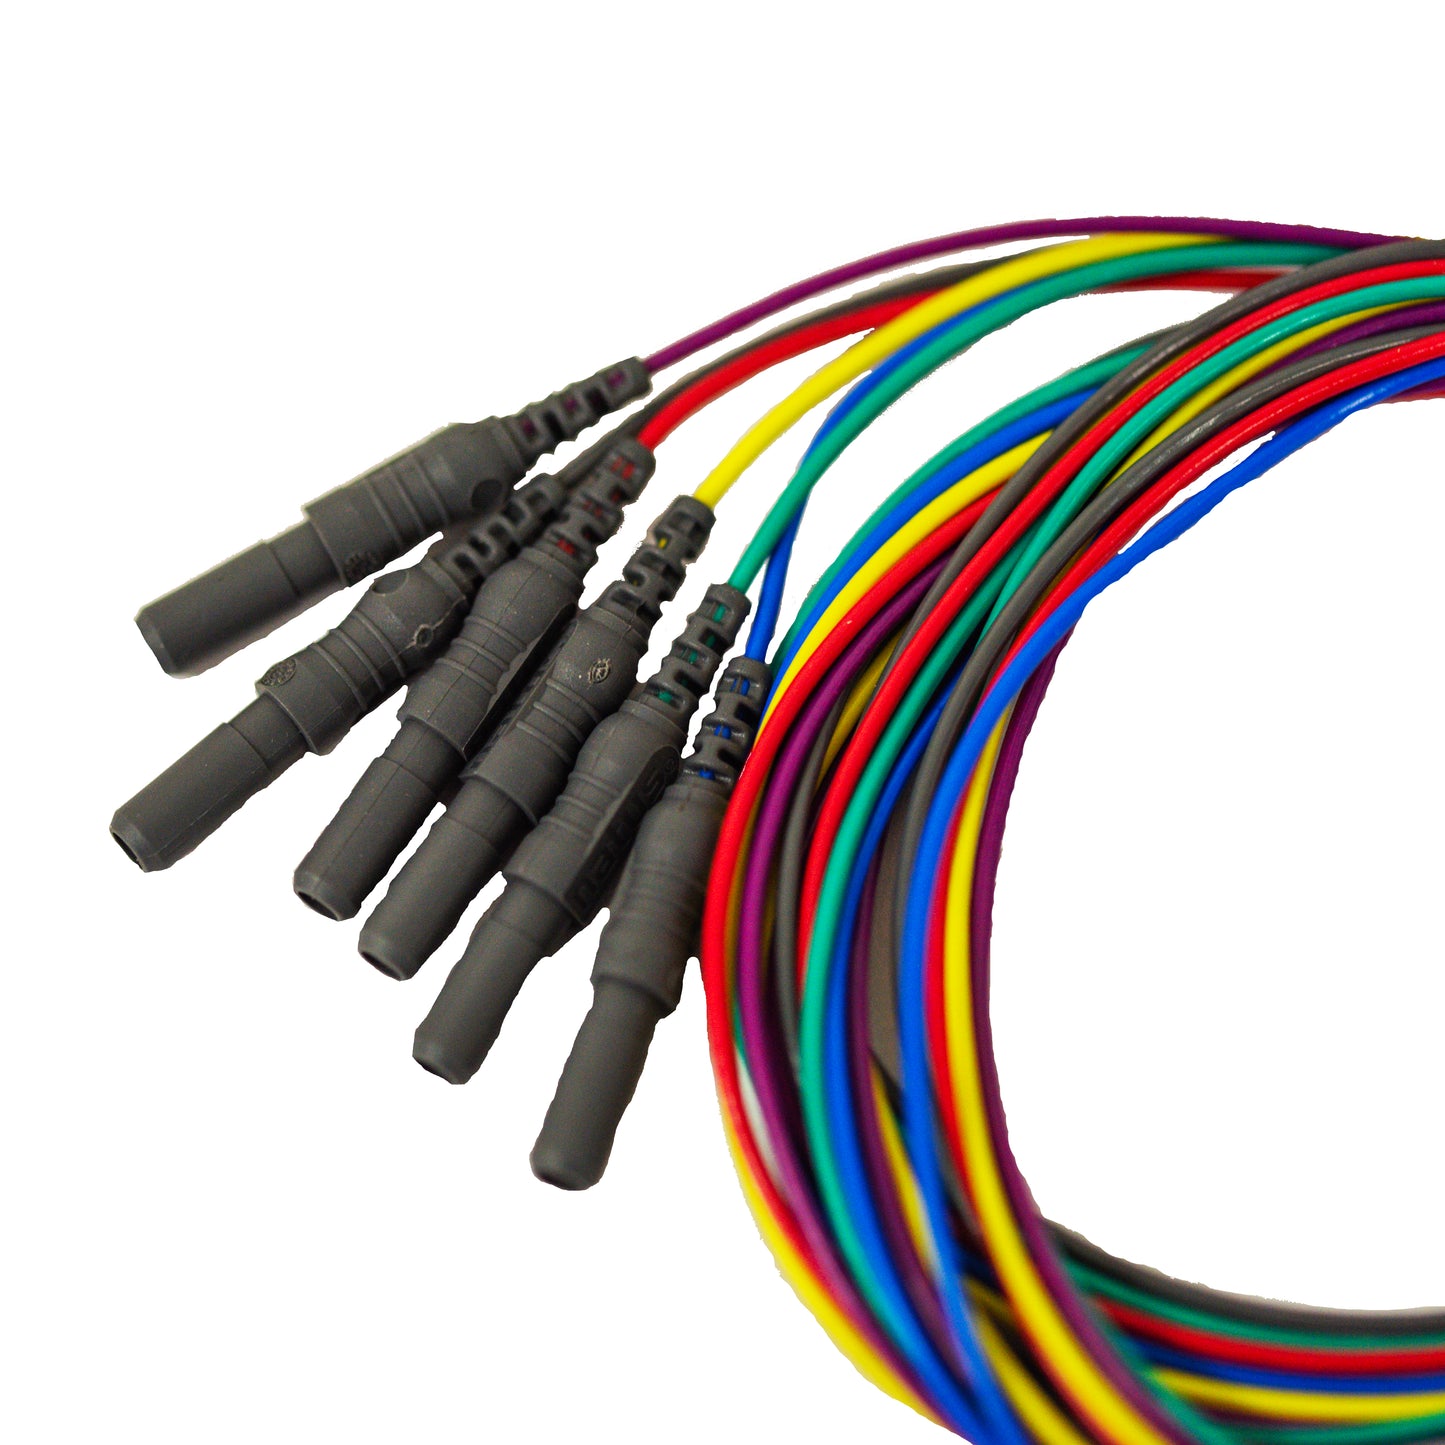 6 Channel Male to Female 1 Meter (39") Extension Cable, with Touchproof 1.5mm DIN, 6 Colors, (MV-431500)